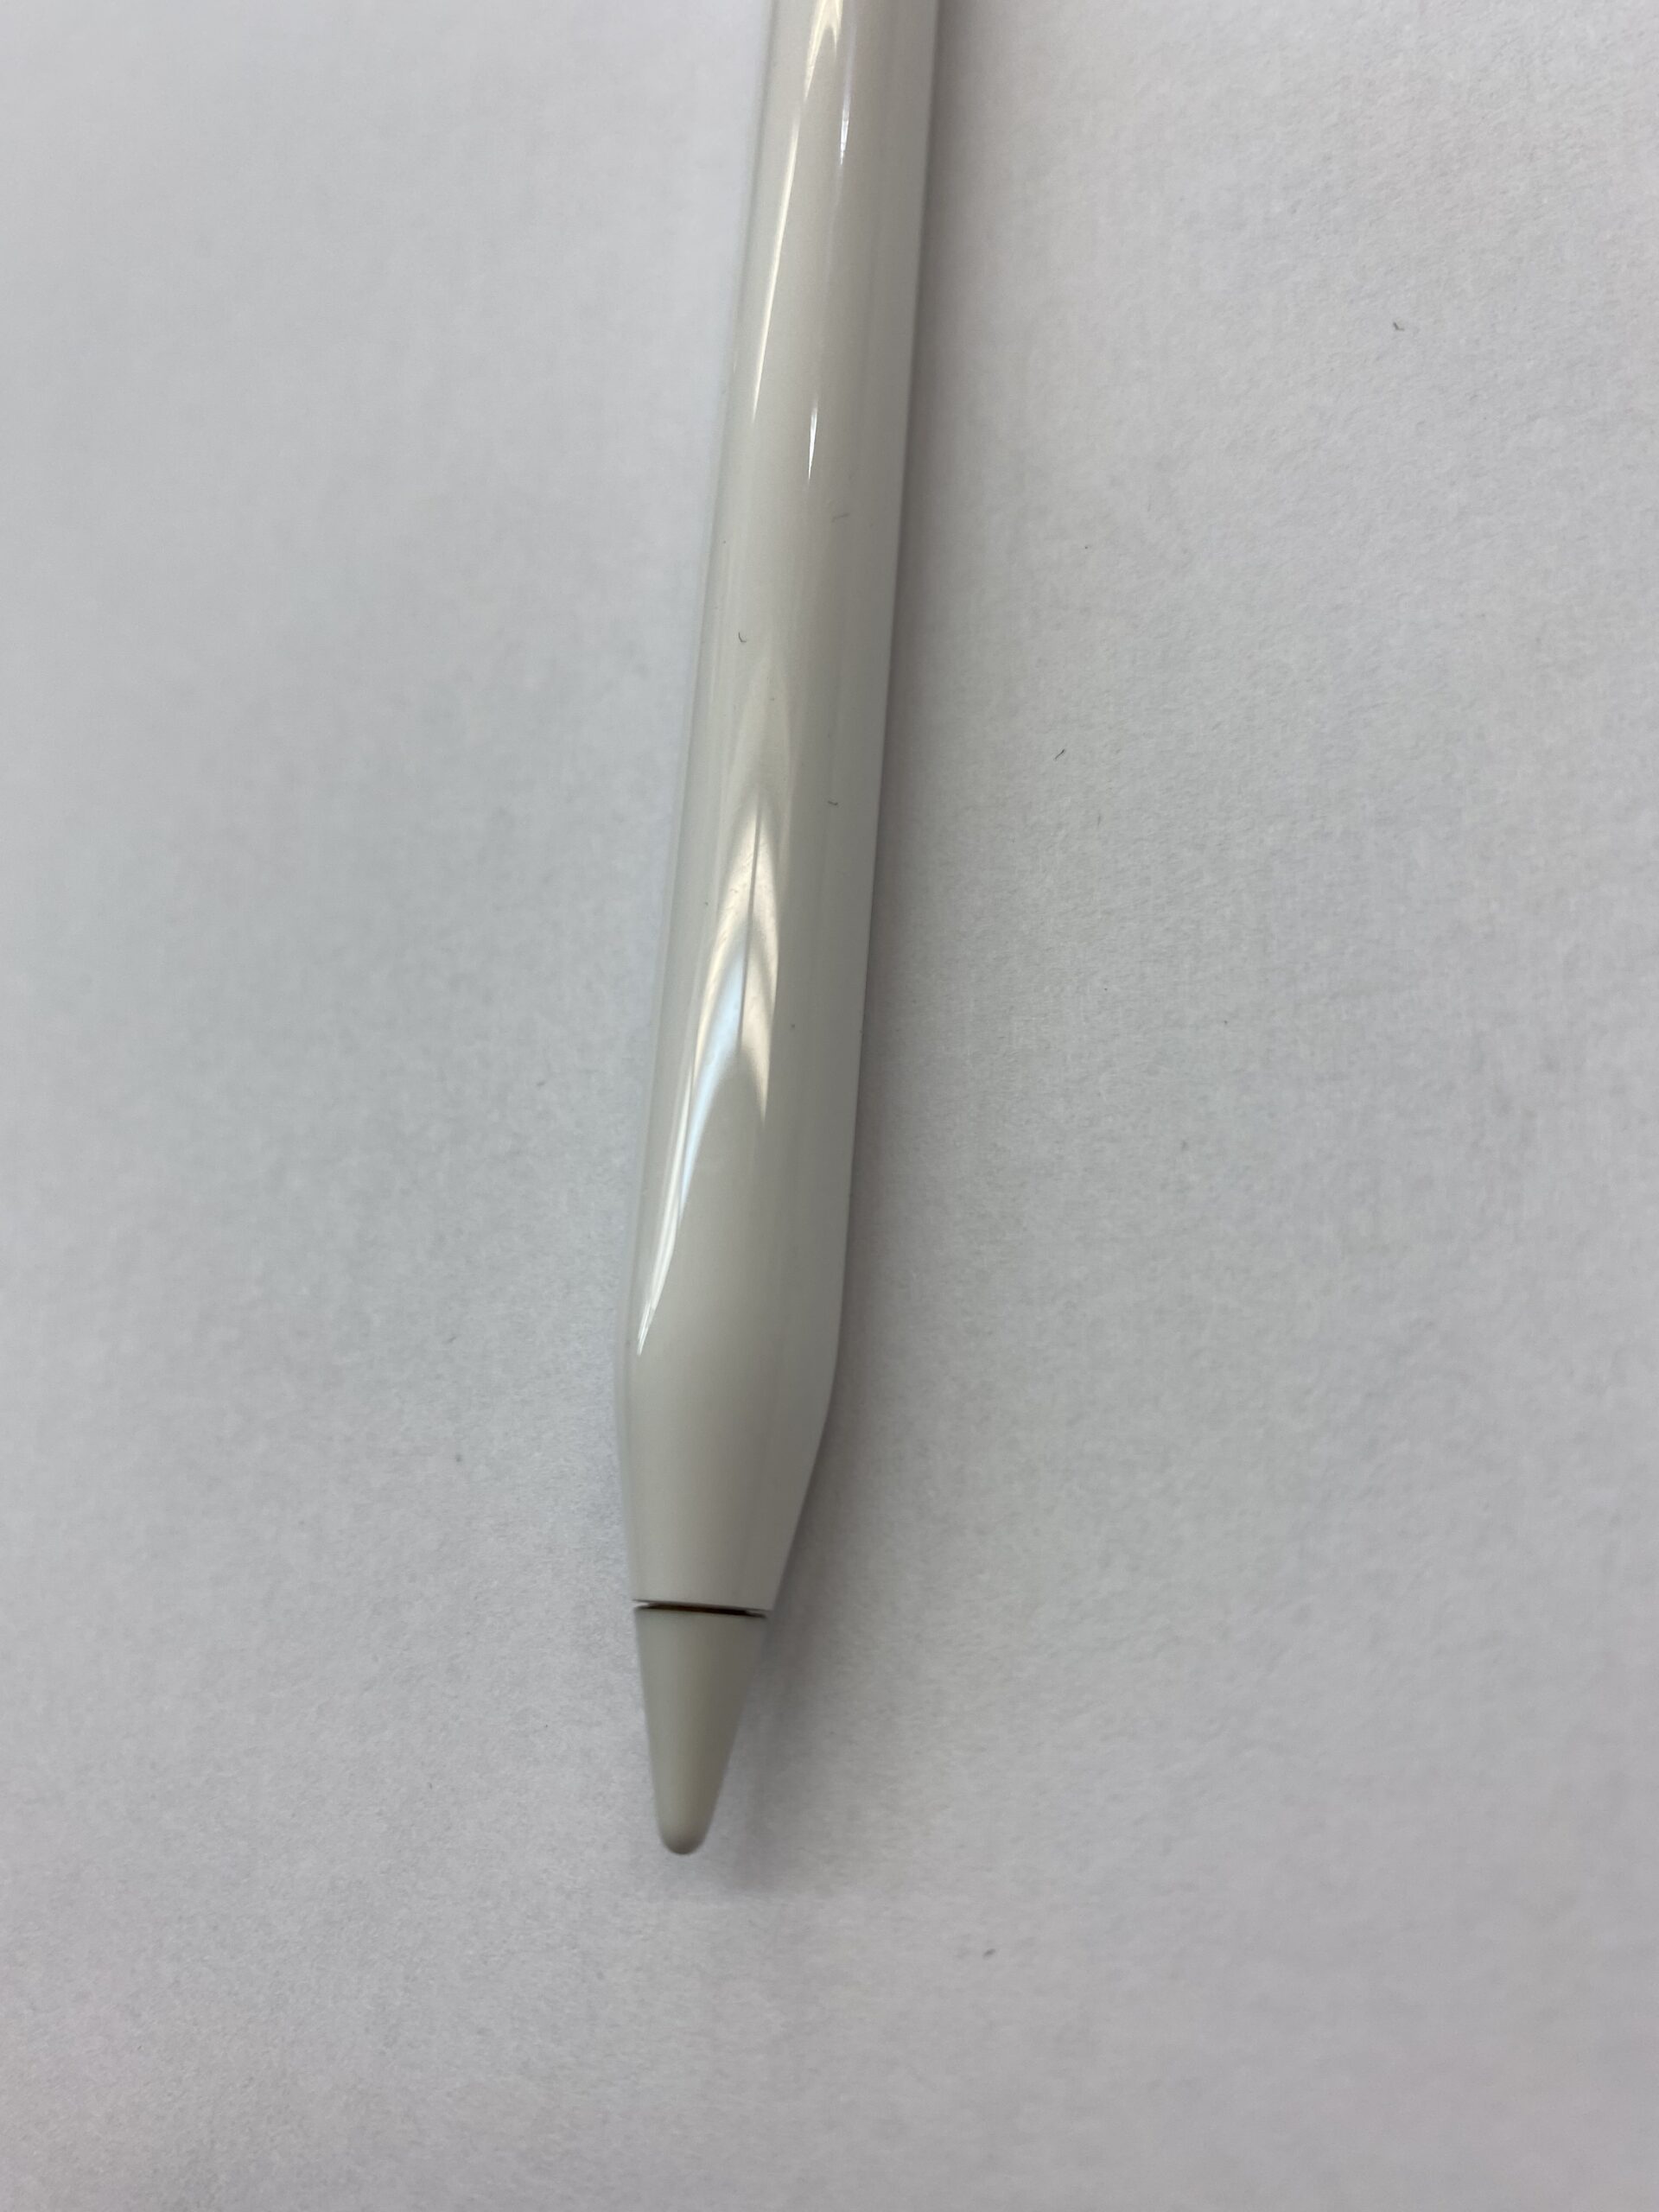 Save a small fortune by buying this $22 Apple Pencil alternative